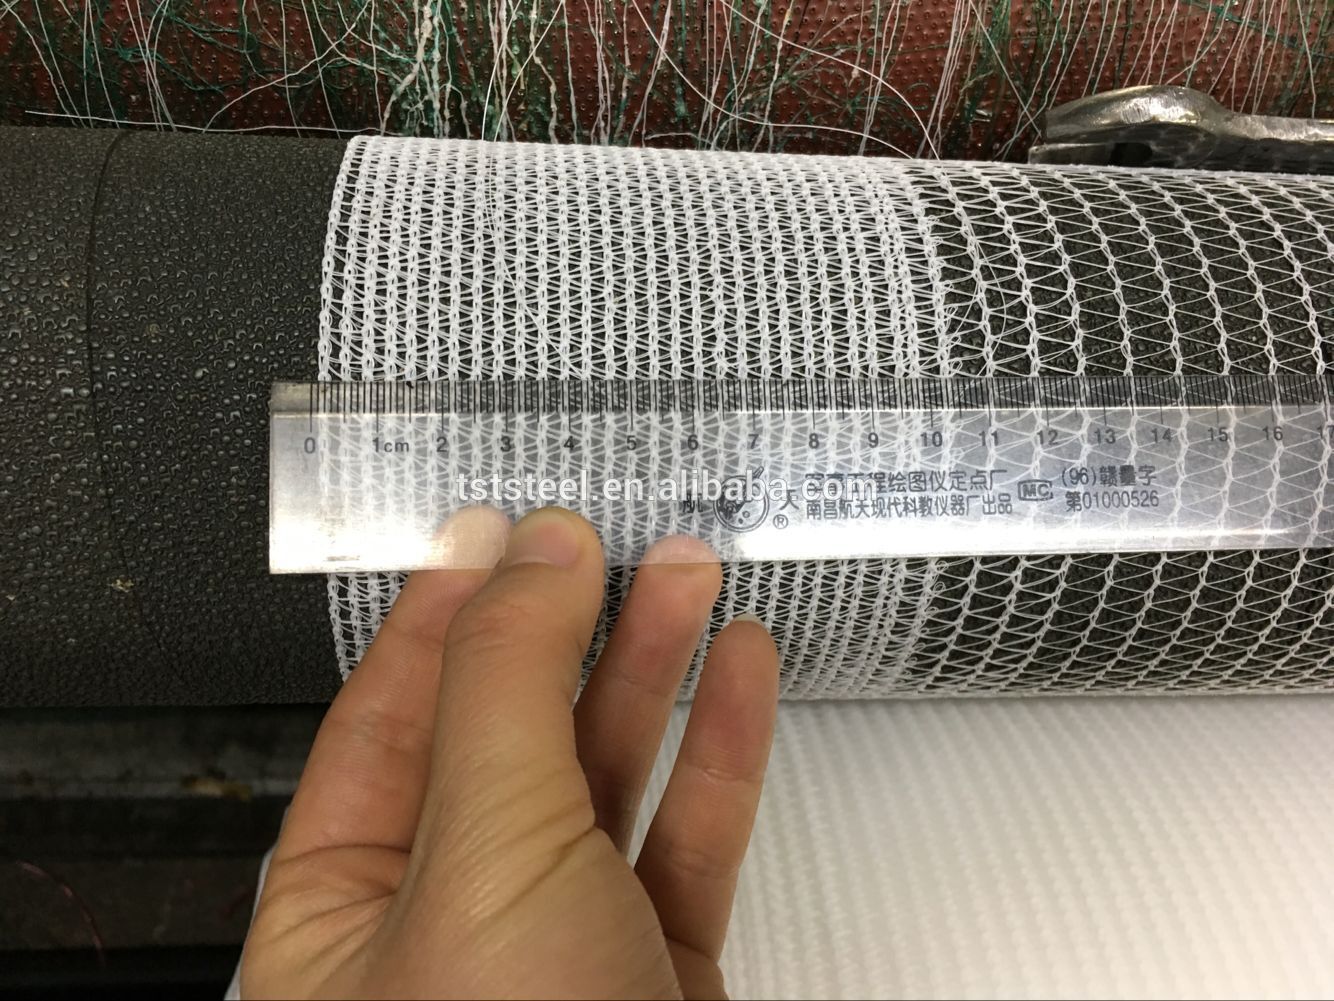 High quality anti-hail monofilament net/anti-insect wire mesh net/anti-hail net for wholesale